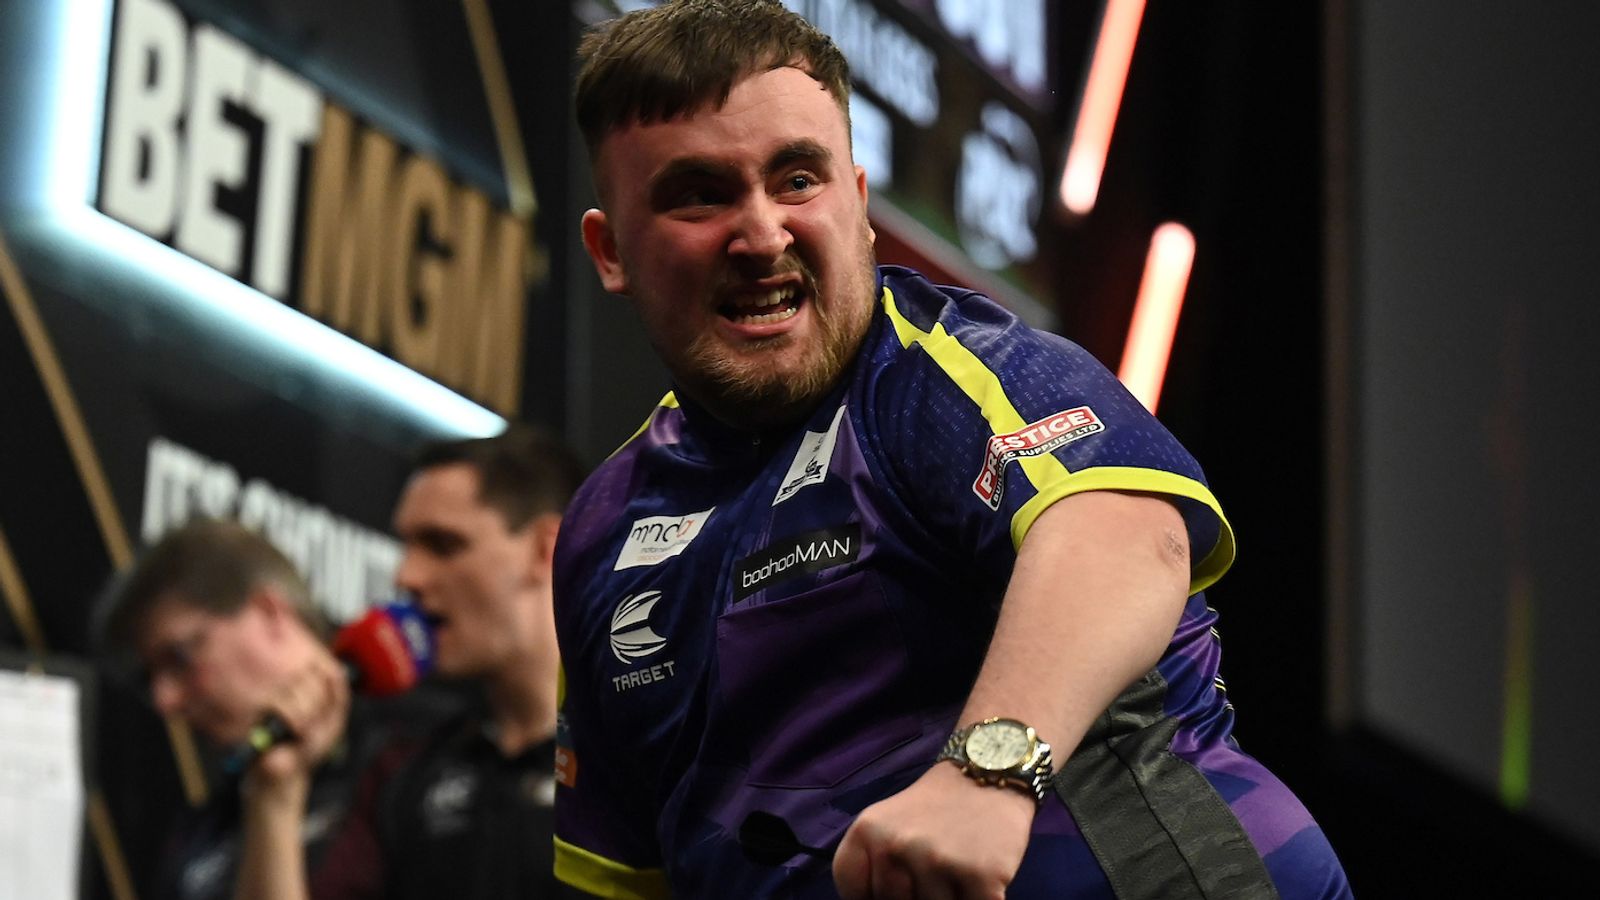 Premier League Darts: Luke Littler fights back against Nathan Aspinall to seal epic Premier League night win in Belfast